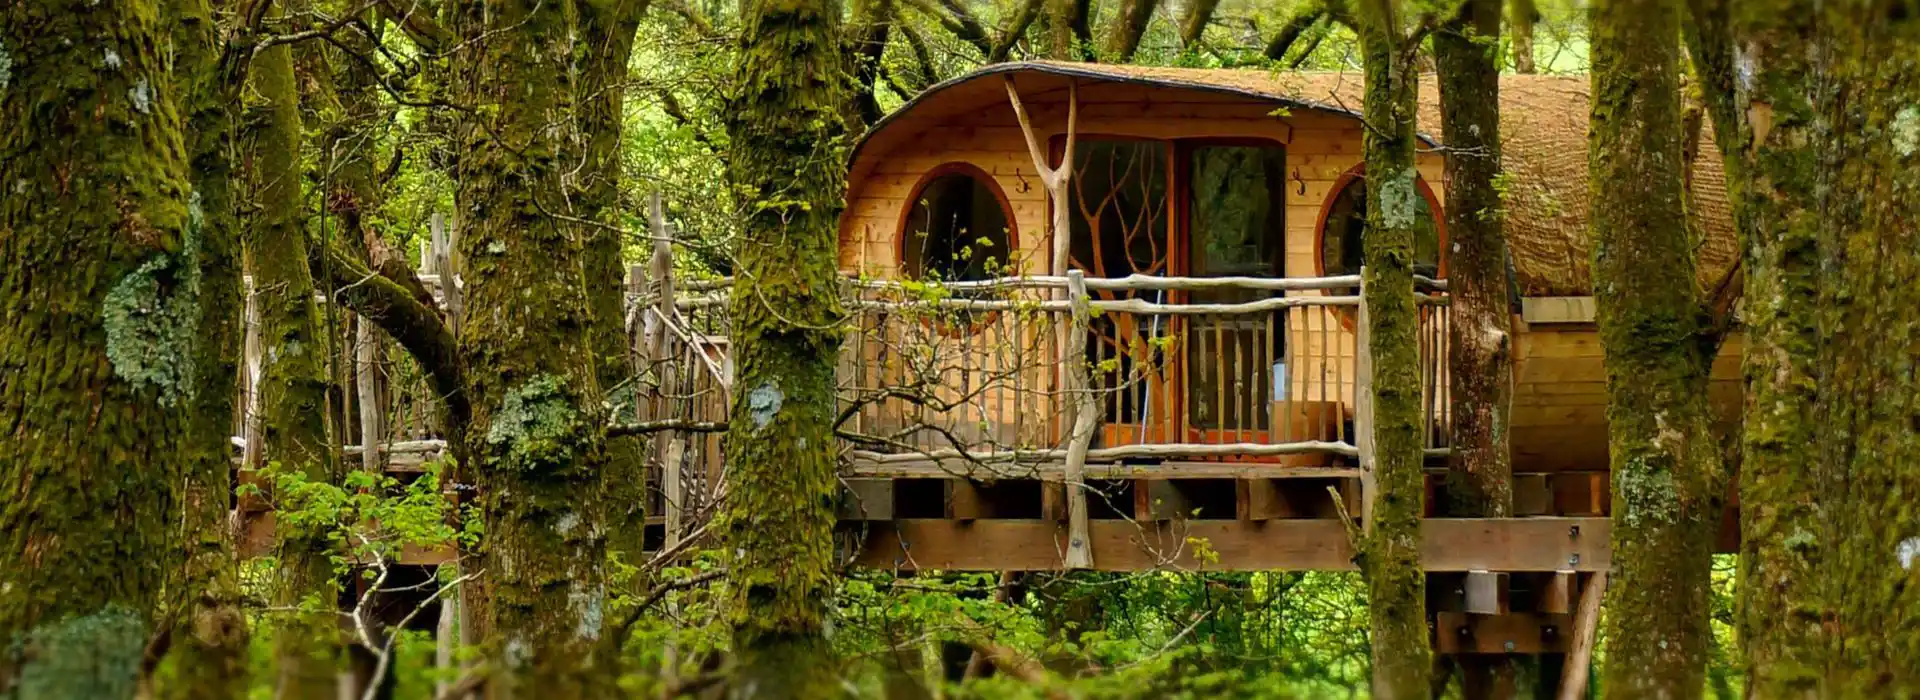 Best and most unique glamping sites in the UK